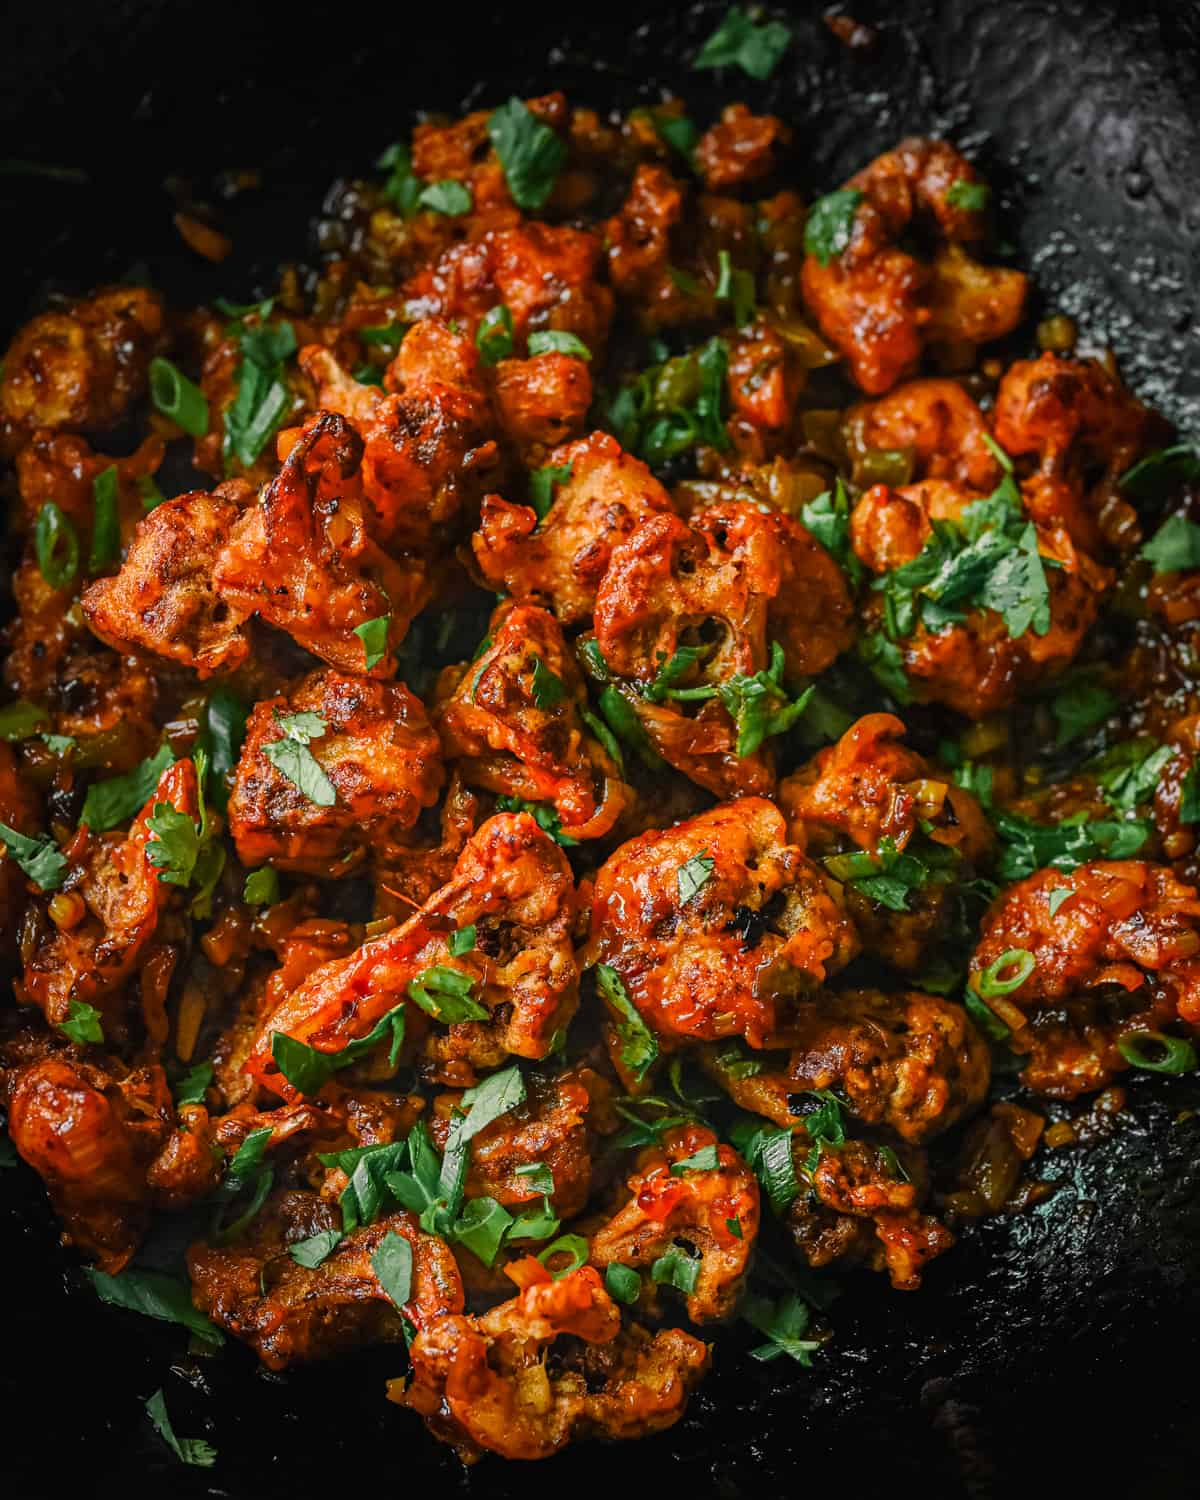 Gobi Manchurian in a wok, garnished with scallions and cilantro